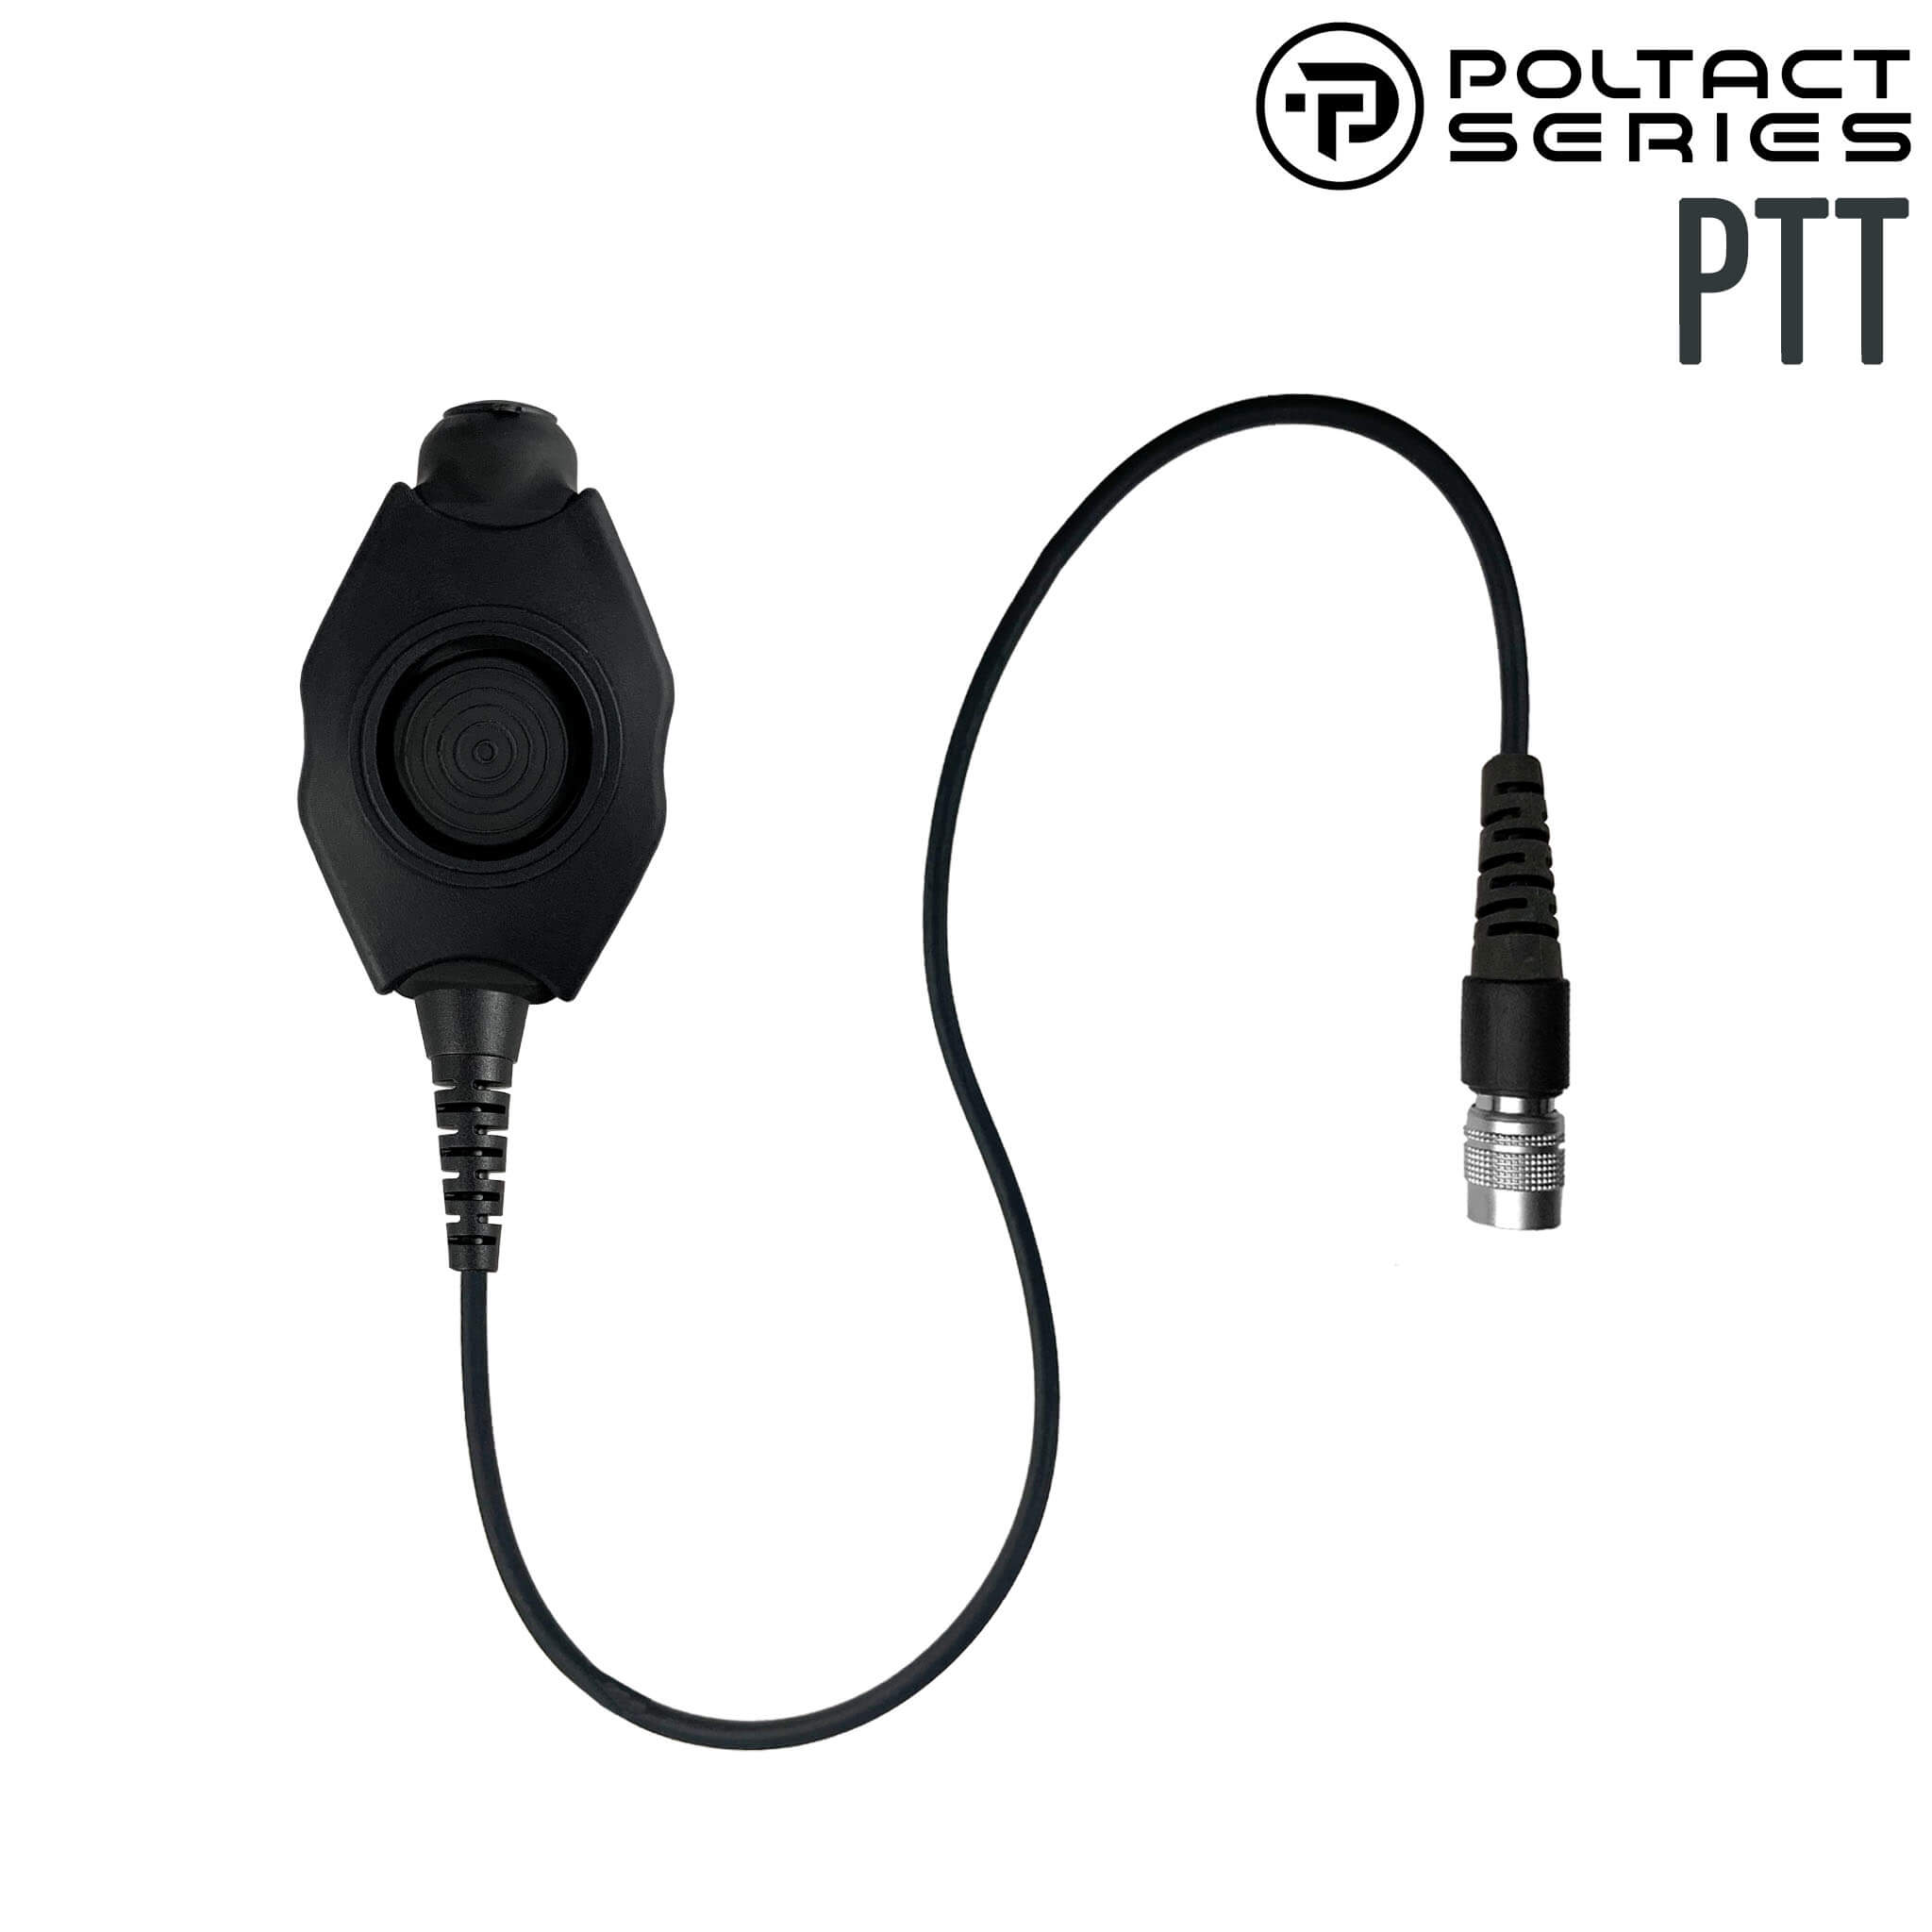 Tactical Radio PTT(Straight Cable) for Headset(Hirose Adapter System): NATO/Military Wiring, Gentex, Ops-Core, OTTO, Select Peltor Models, Helicopter - Replacement/Upgrade - No Adapter